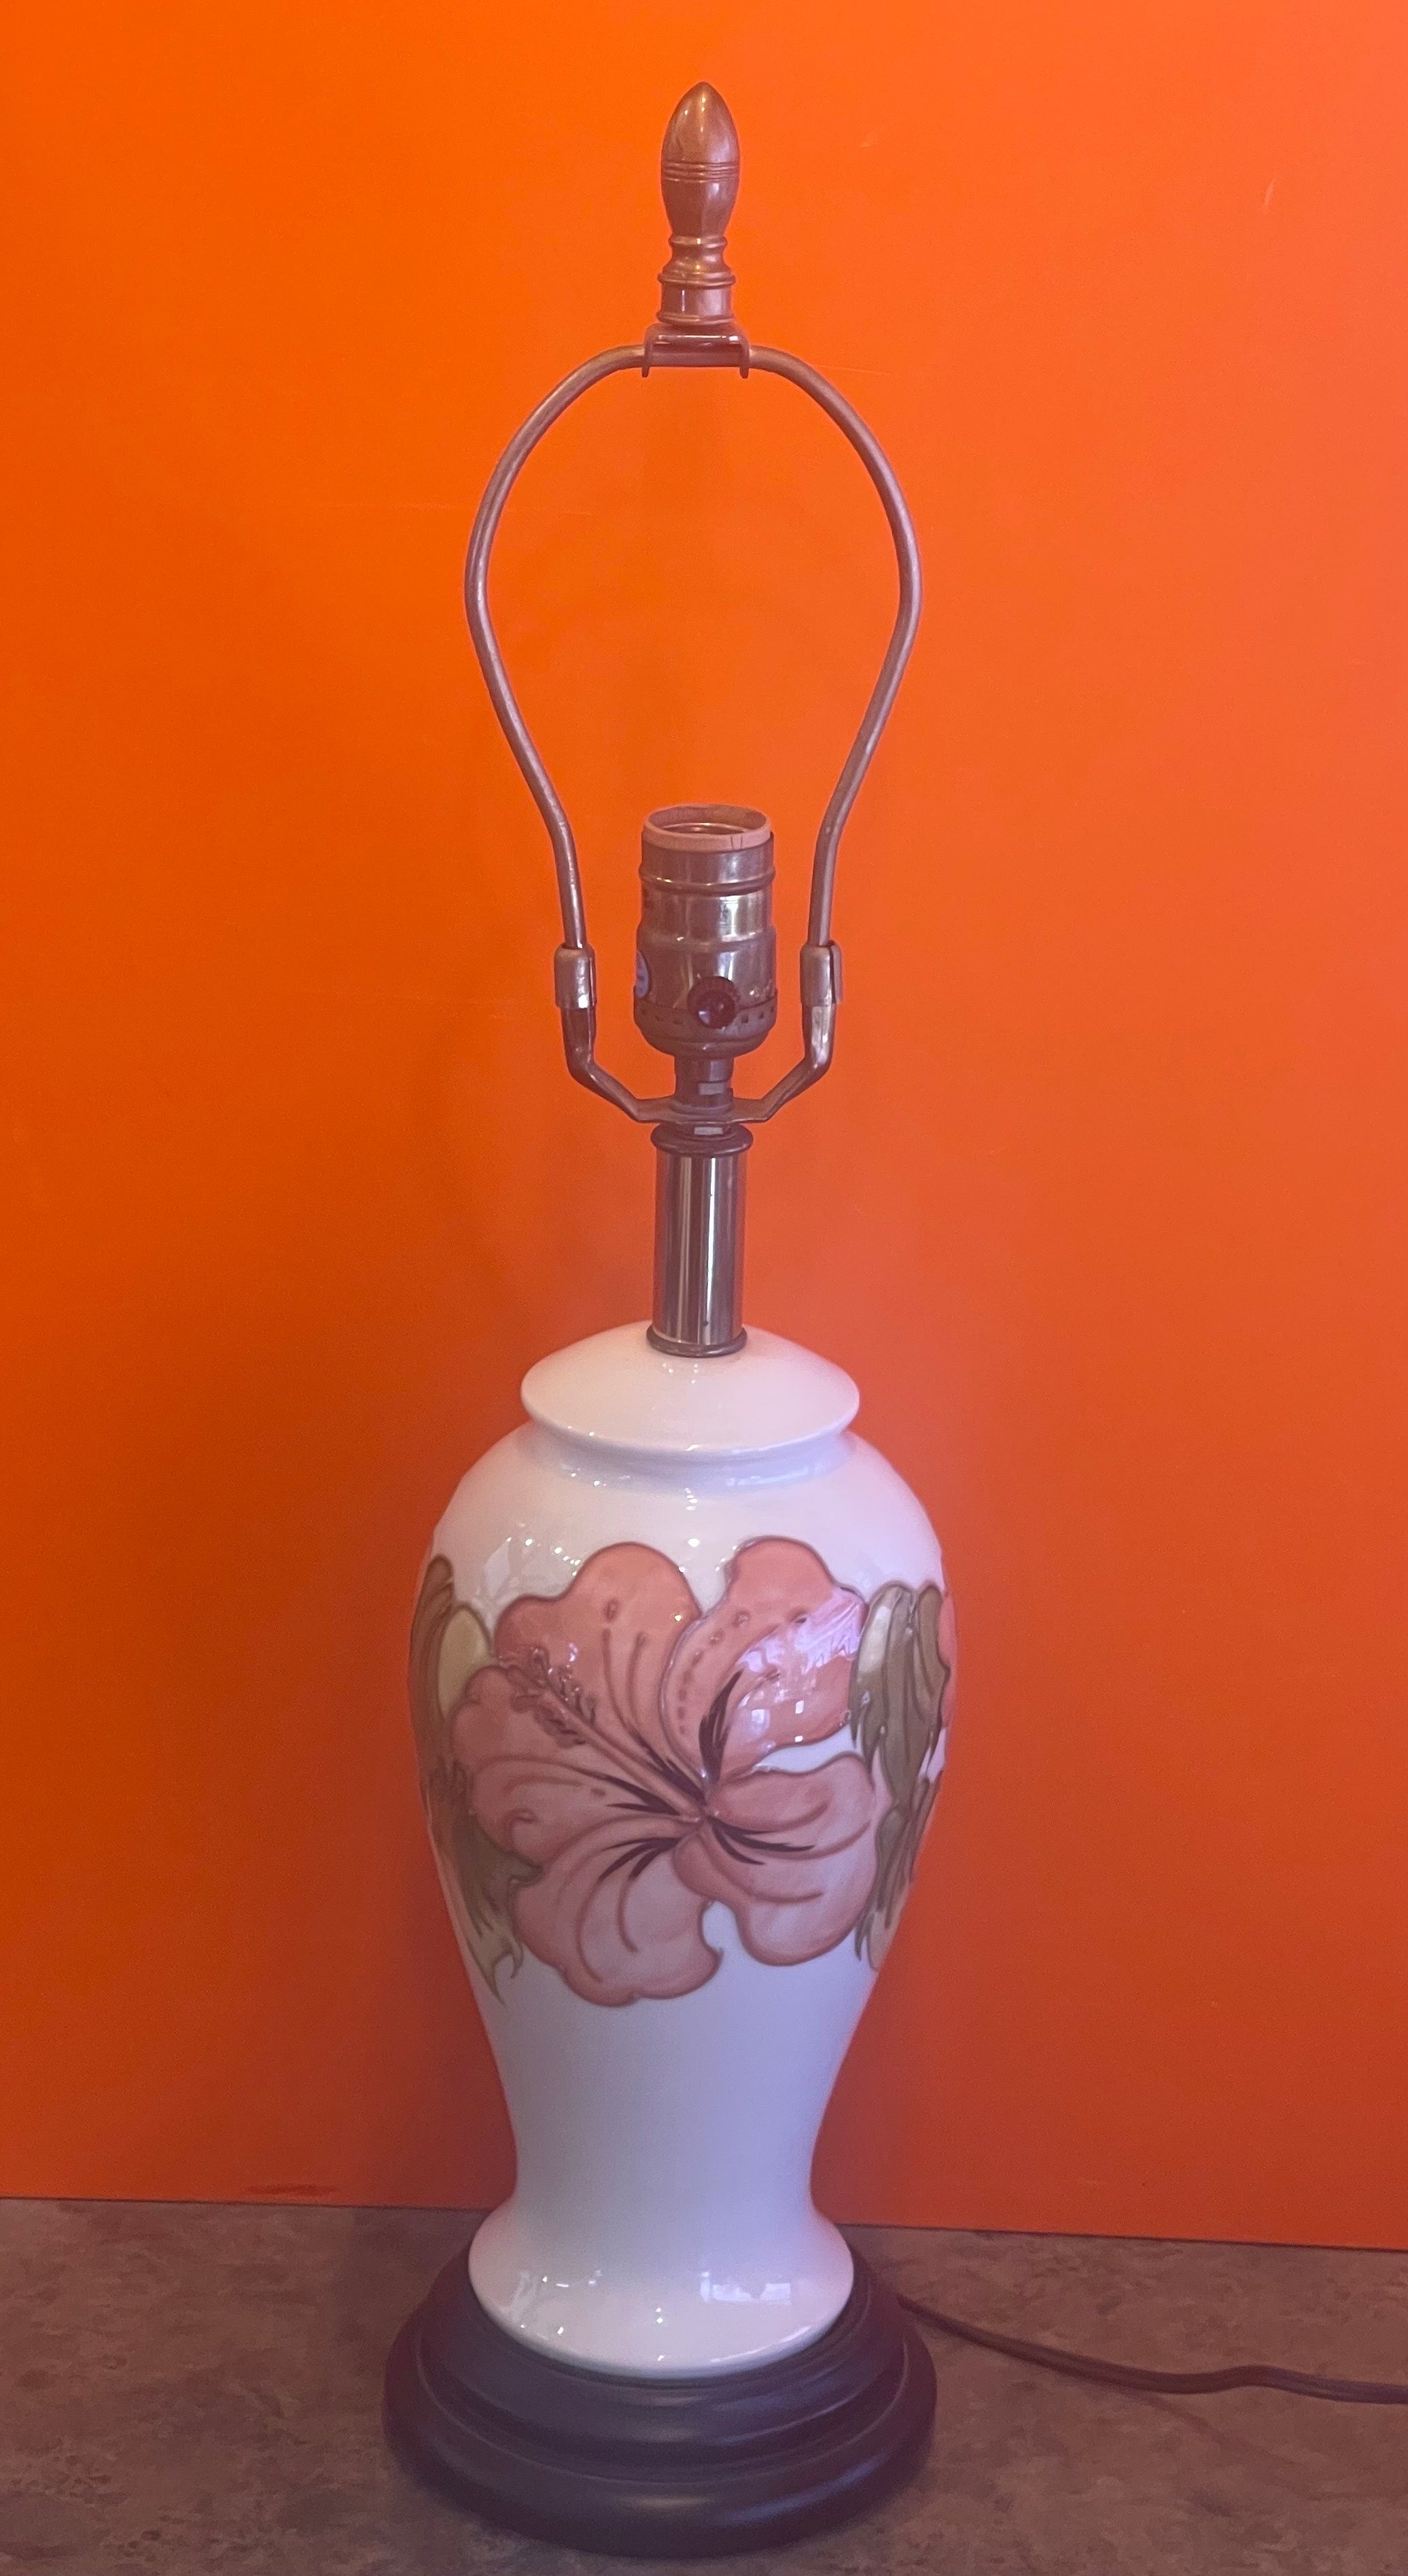 A glazed ceramic studio pottery table lamp with floral motif on walnut base by Moorcroft Pottery, circa 1970s. The lamp measures 5.75